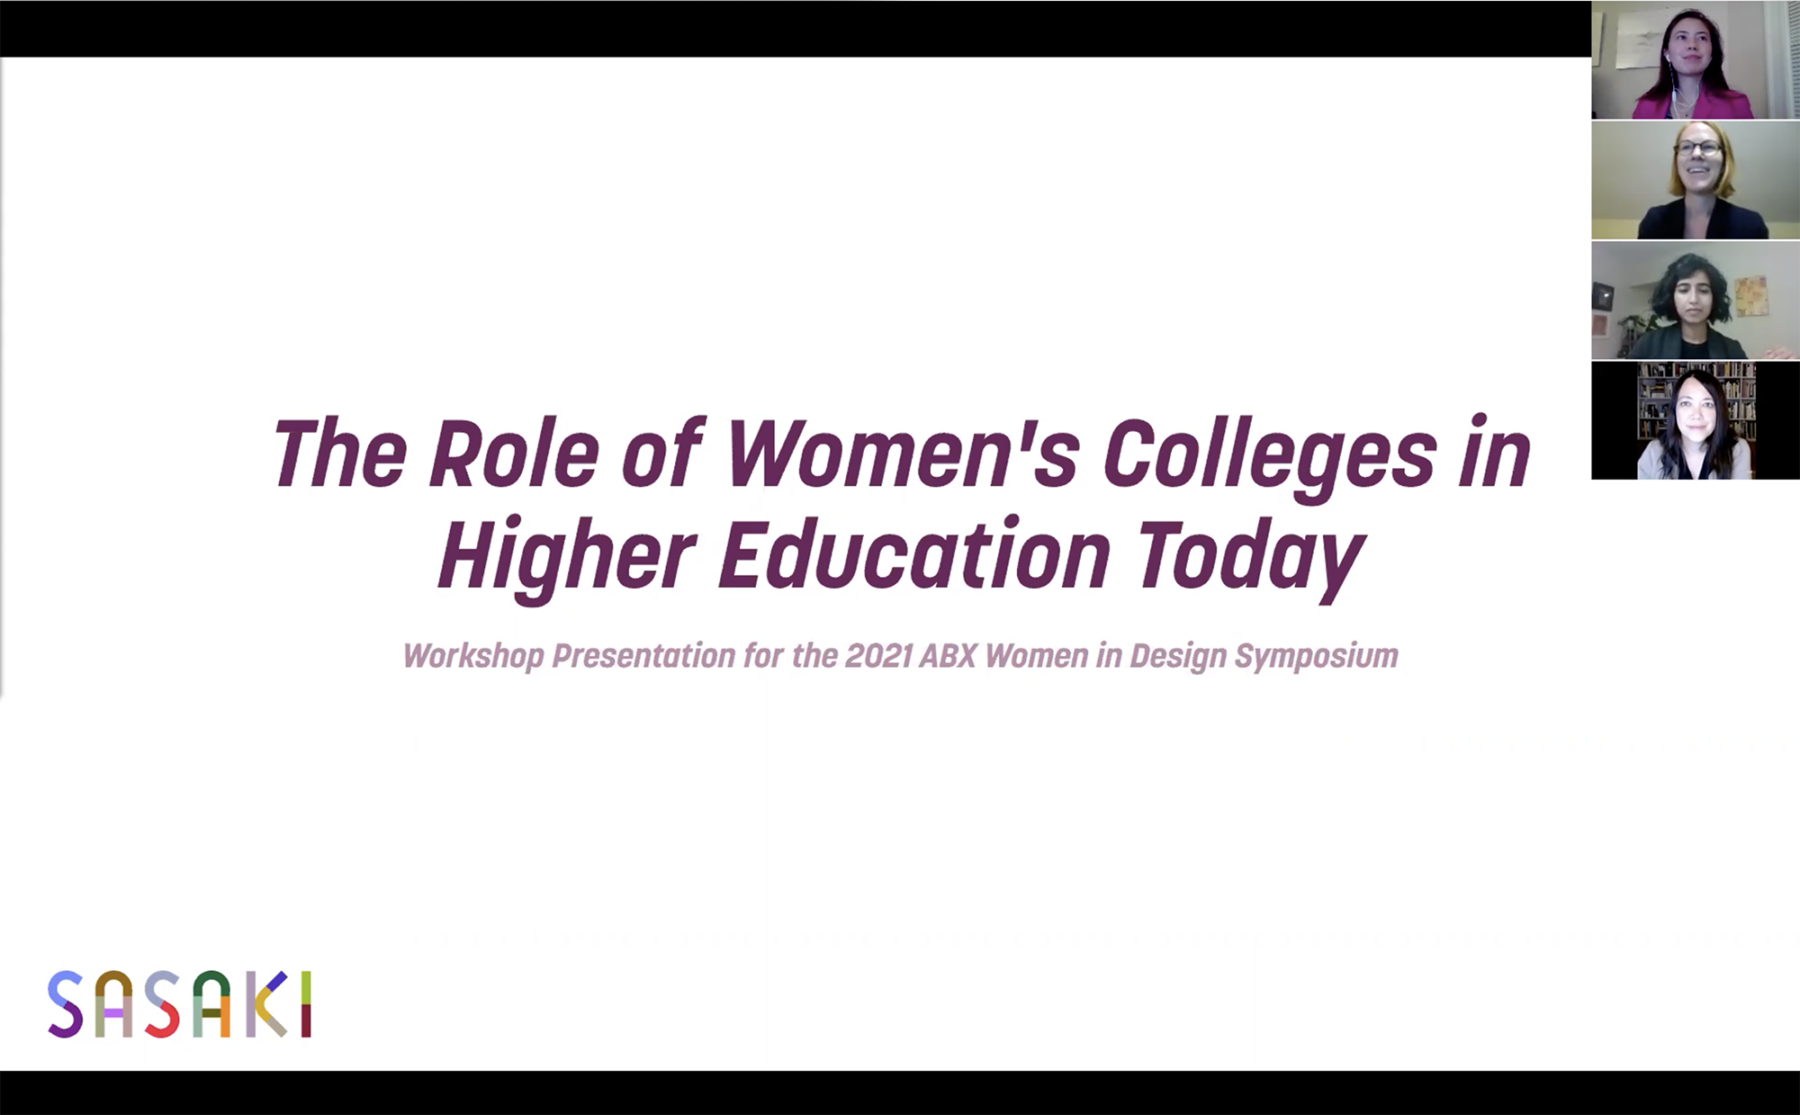 Screenshot of presentation title slide with images of the presenters over zoom